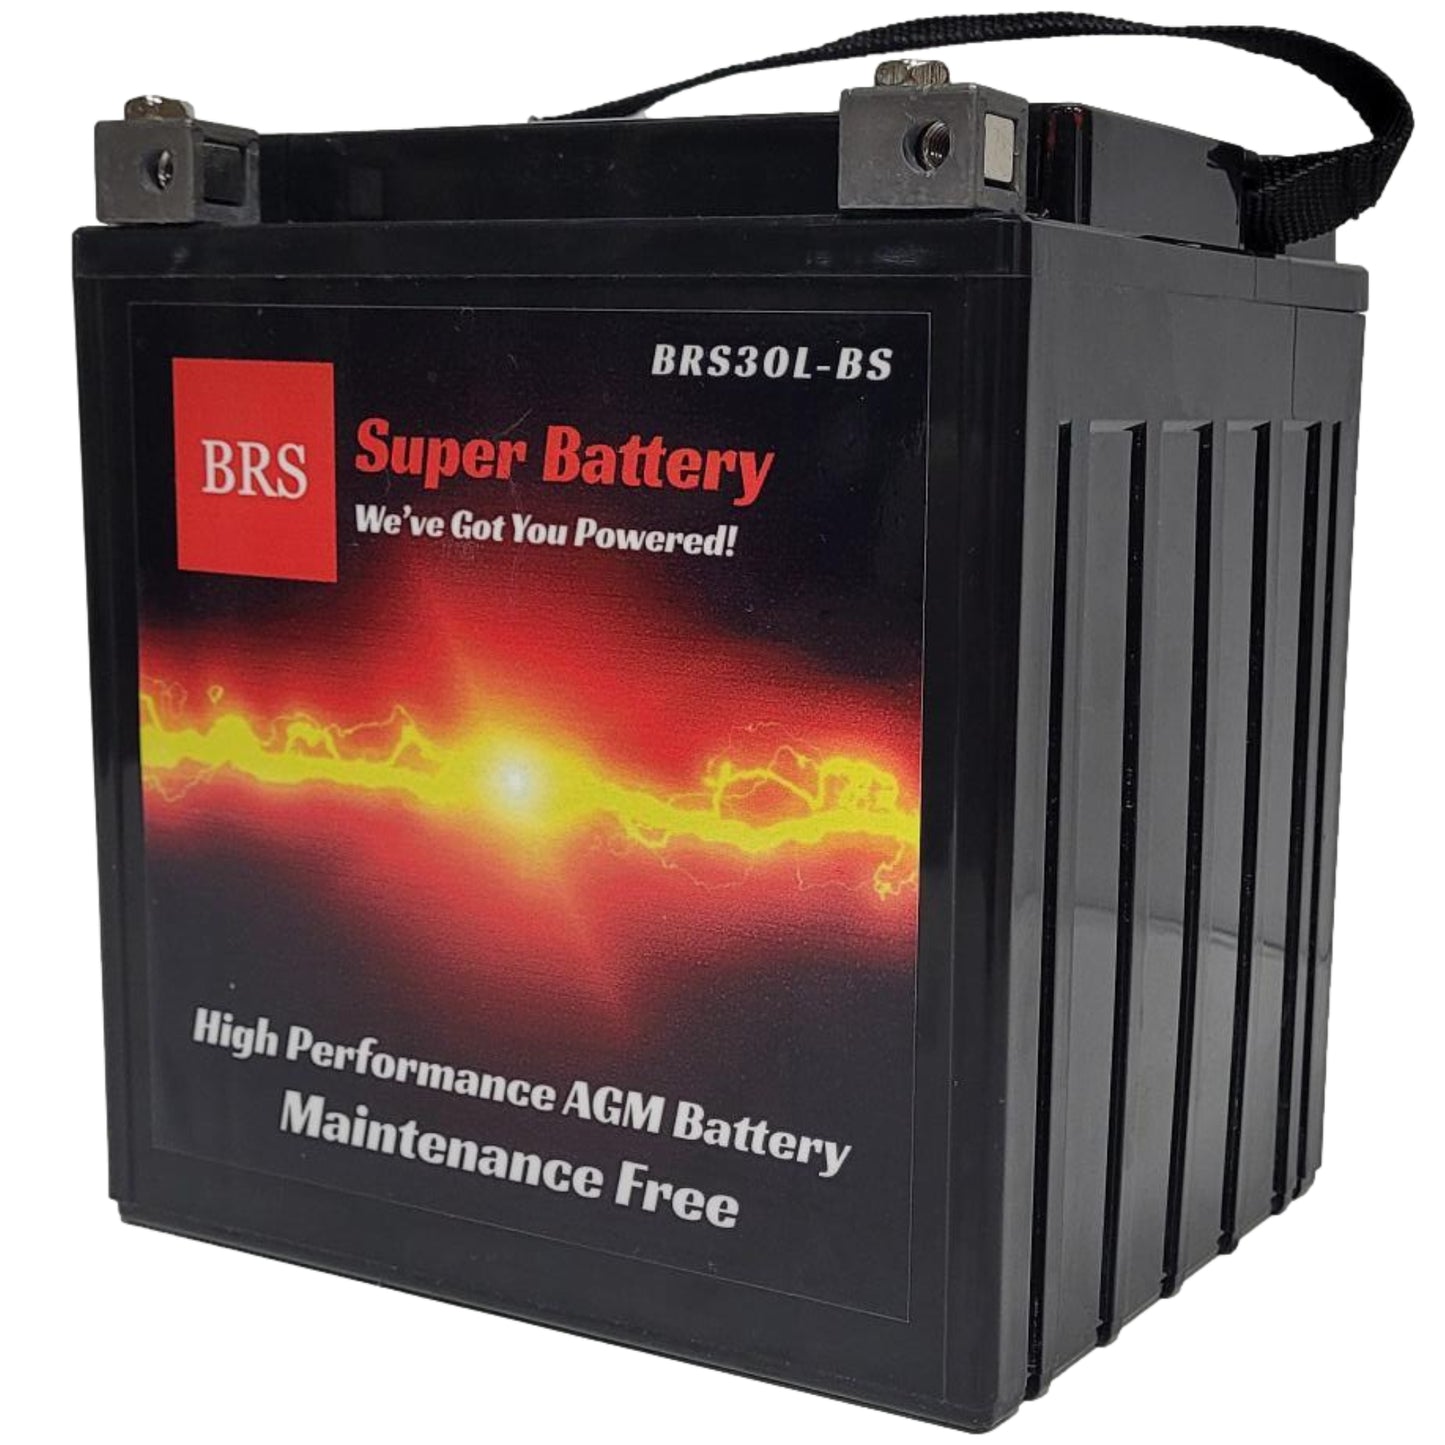 WPX30L-BS 12v High Performance Sealed AGM PowerSport 10 Year Battery - BRS Super Battery